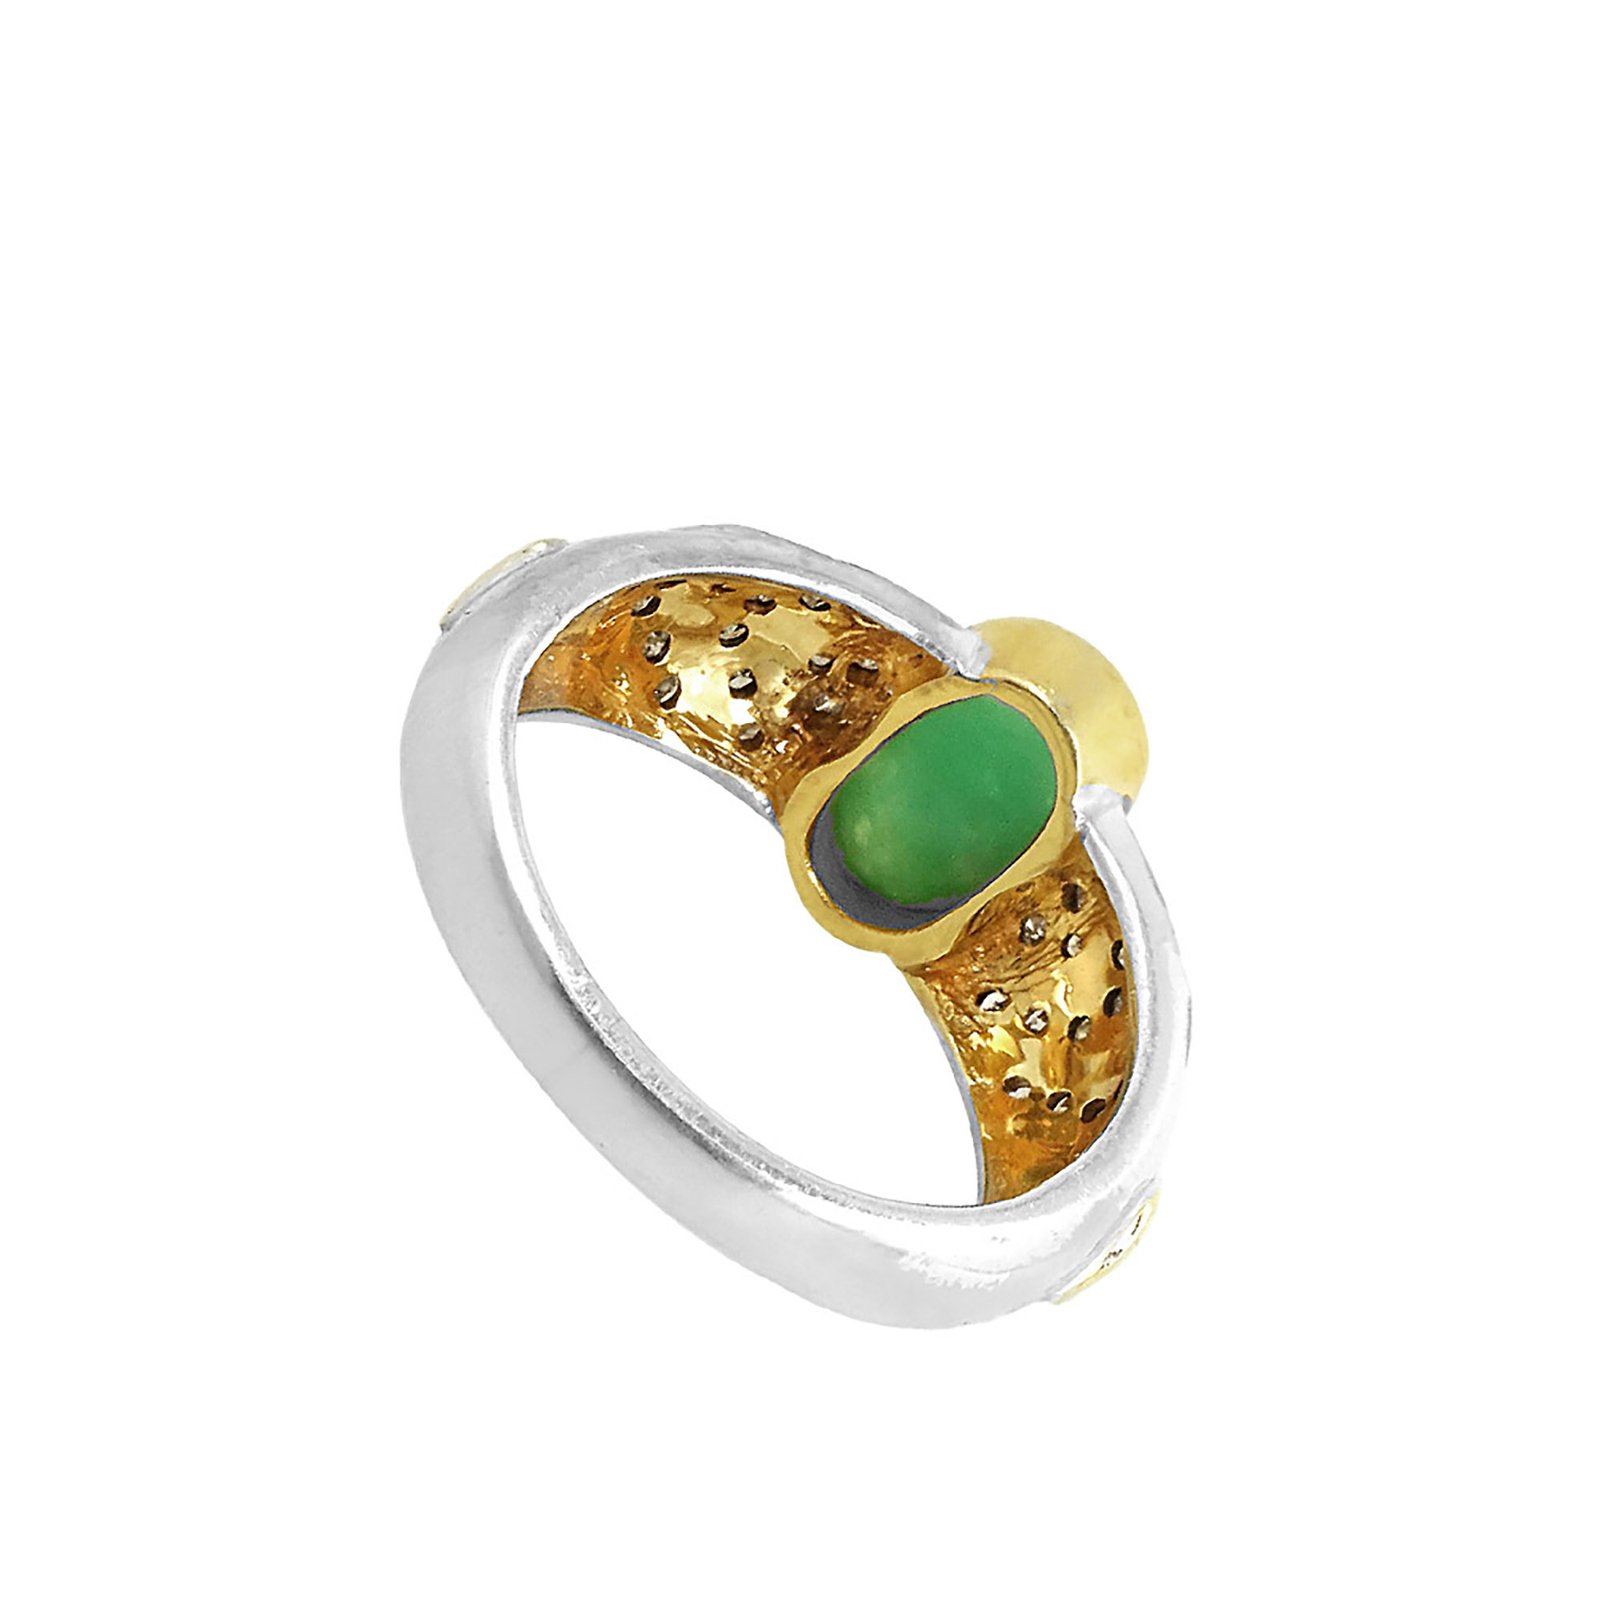 Solid gold & silver diamond ring with emerald